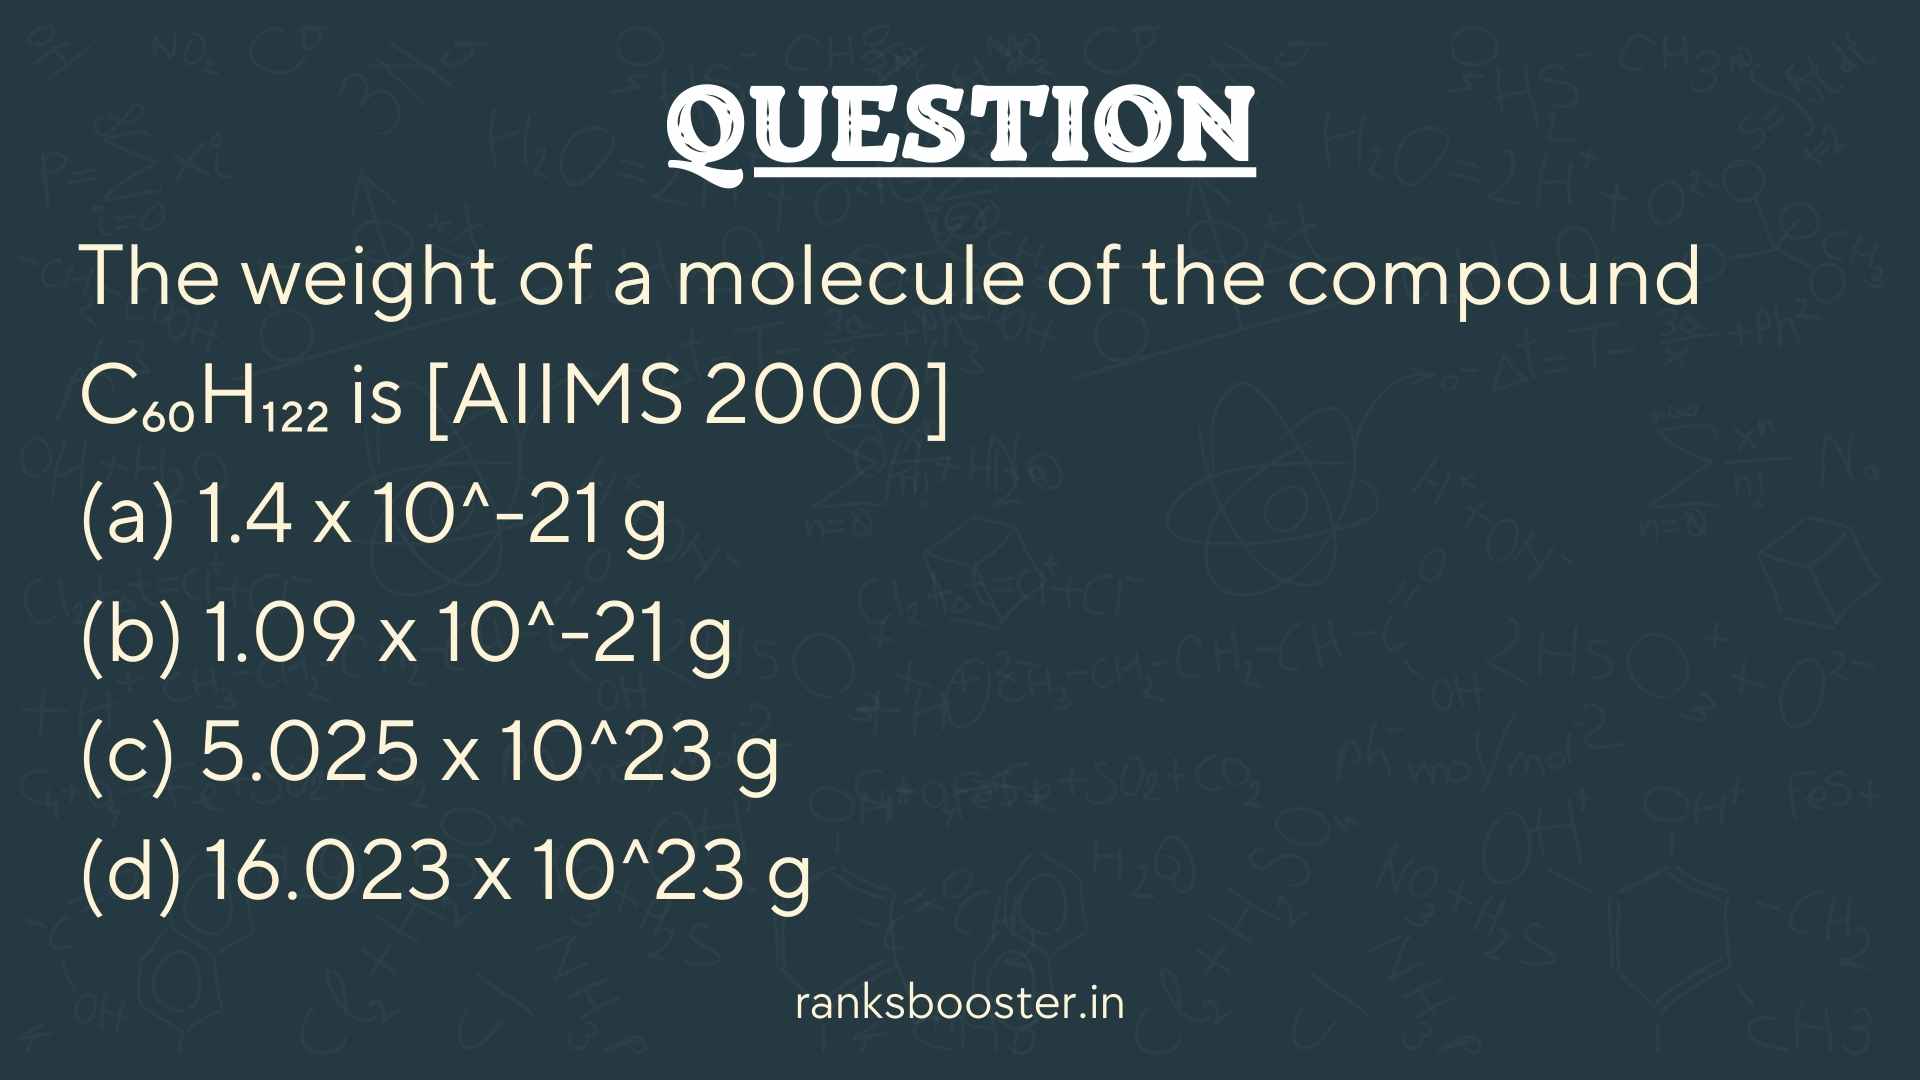 Question: The weight of a molecule of the compound C₆₀H₁₂₂ is [AIIMS 2000] (a) 1.4 x 10^-21 g (b) 1.09 x 10^-21 g (c) 5.025 x 10^23 g (d) 16.023 x 10^23 g